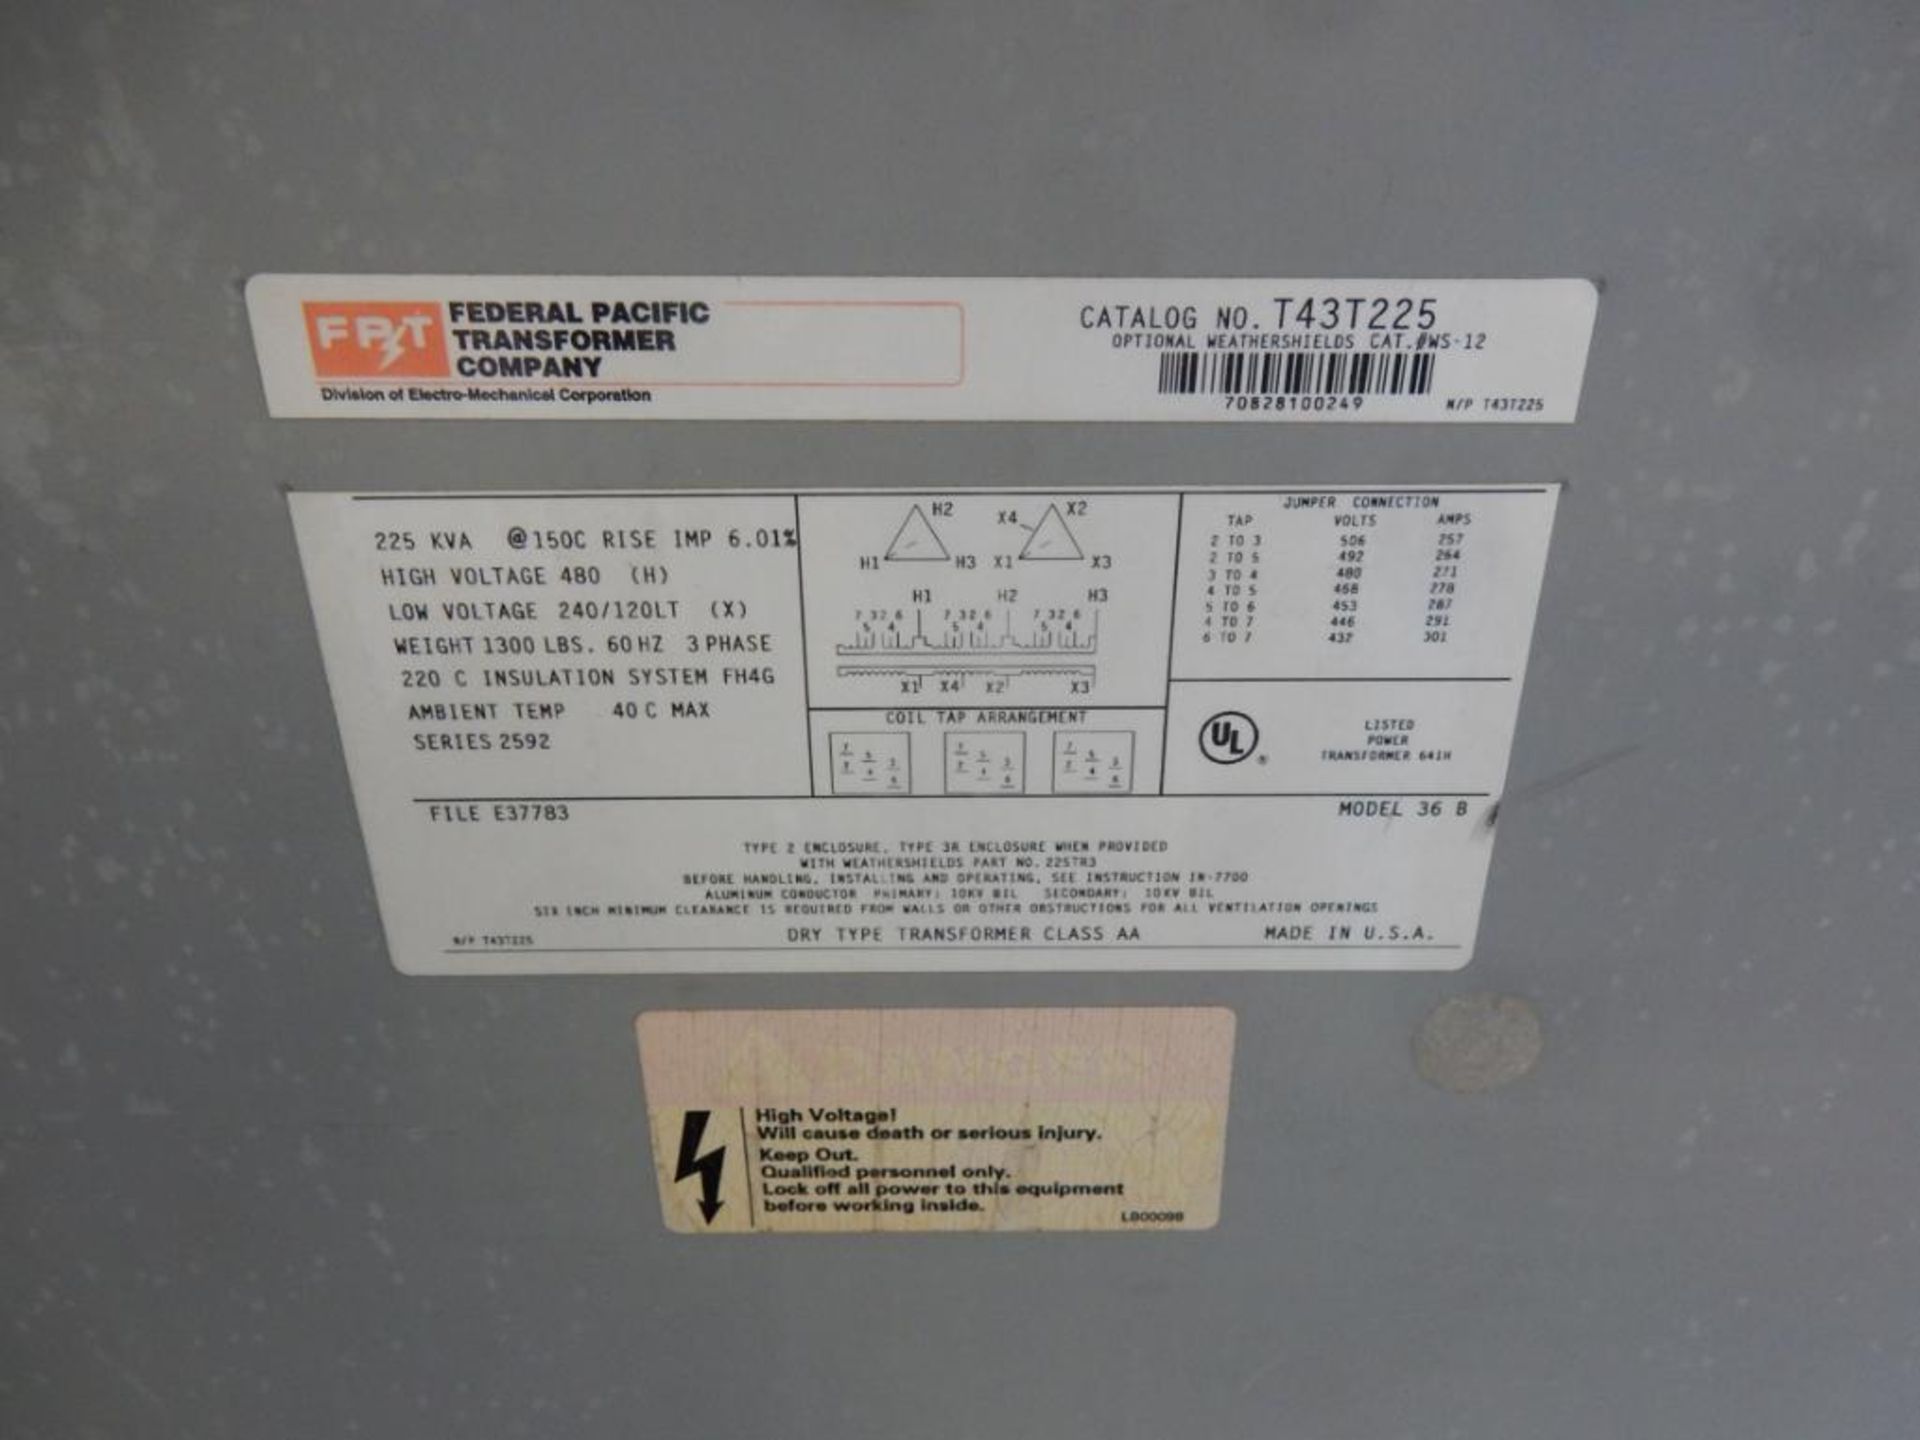 FEDERAL PACIFIC 225 KVA TRANSFORMER, CATALOG# T43T225 - Image 2 of 2